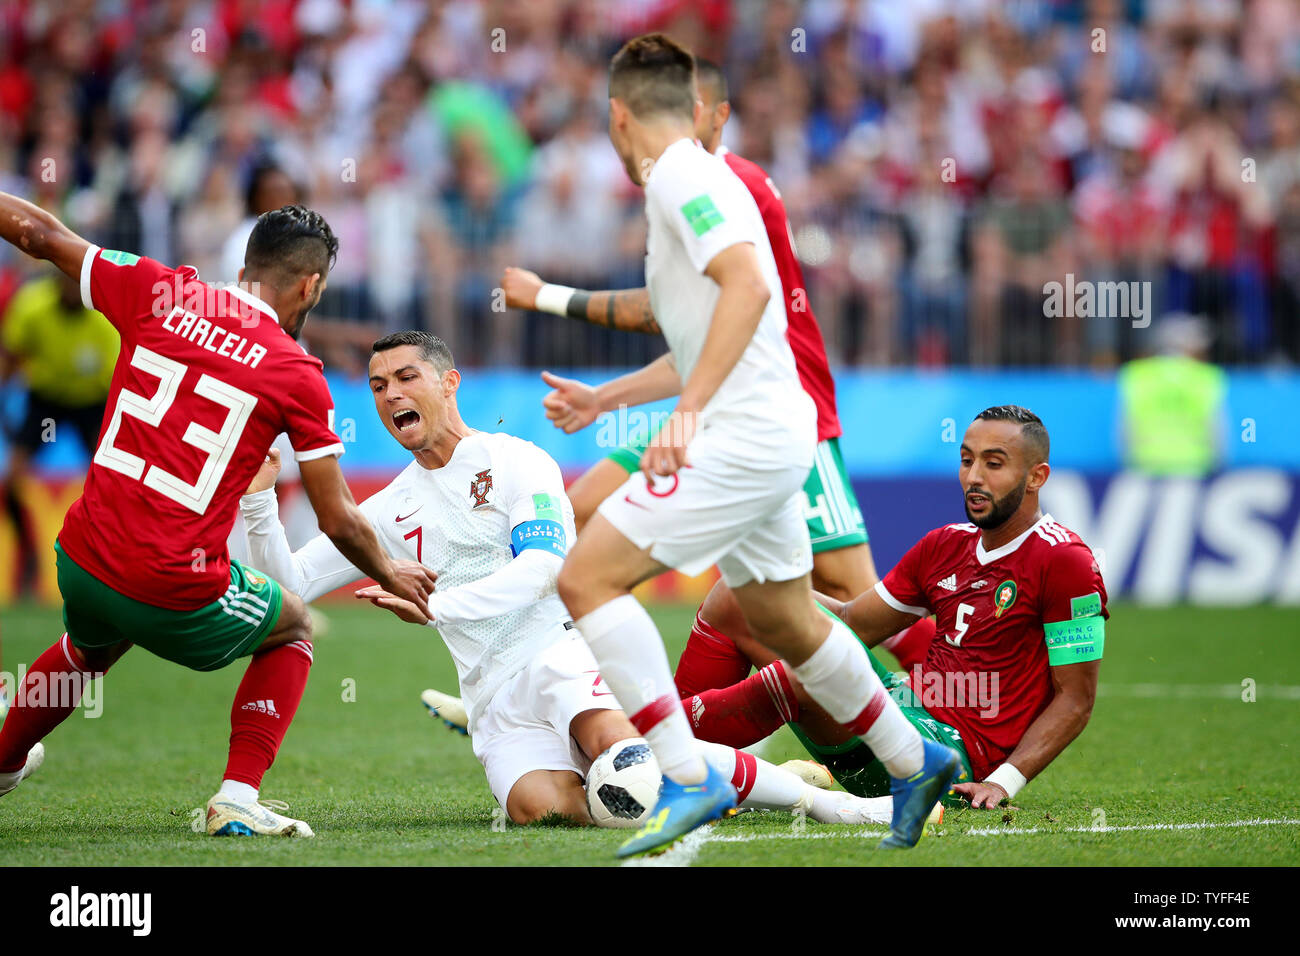 Cristiano Ronaldo (R) of Portugal is fouled by Mehdi Benatia of Morocco during the 2018 FIFA World Cup Group B match at the Luzhniki Stadium in Moscow, Russia on June 20, 2018. Photo by Chris Brunskill/UPI Stock Photo